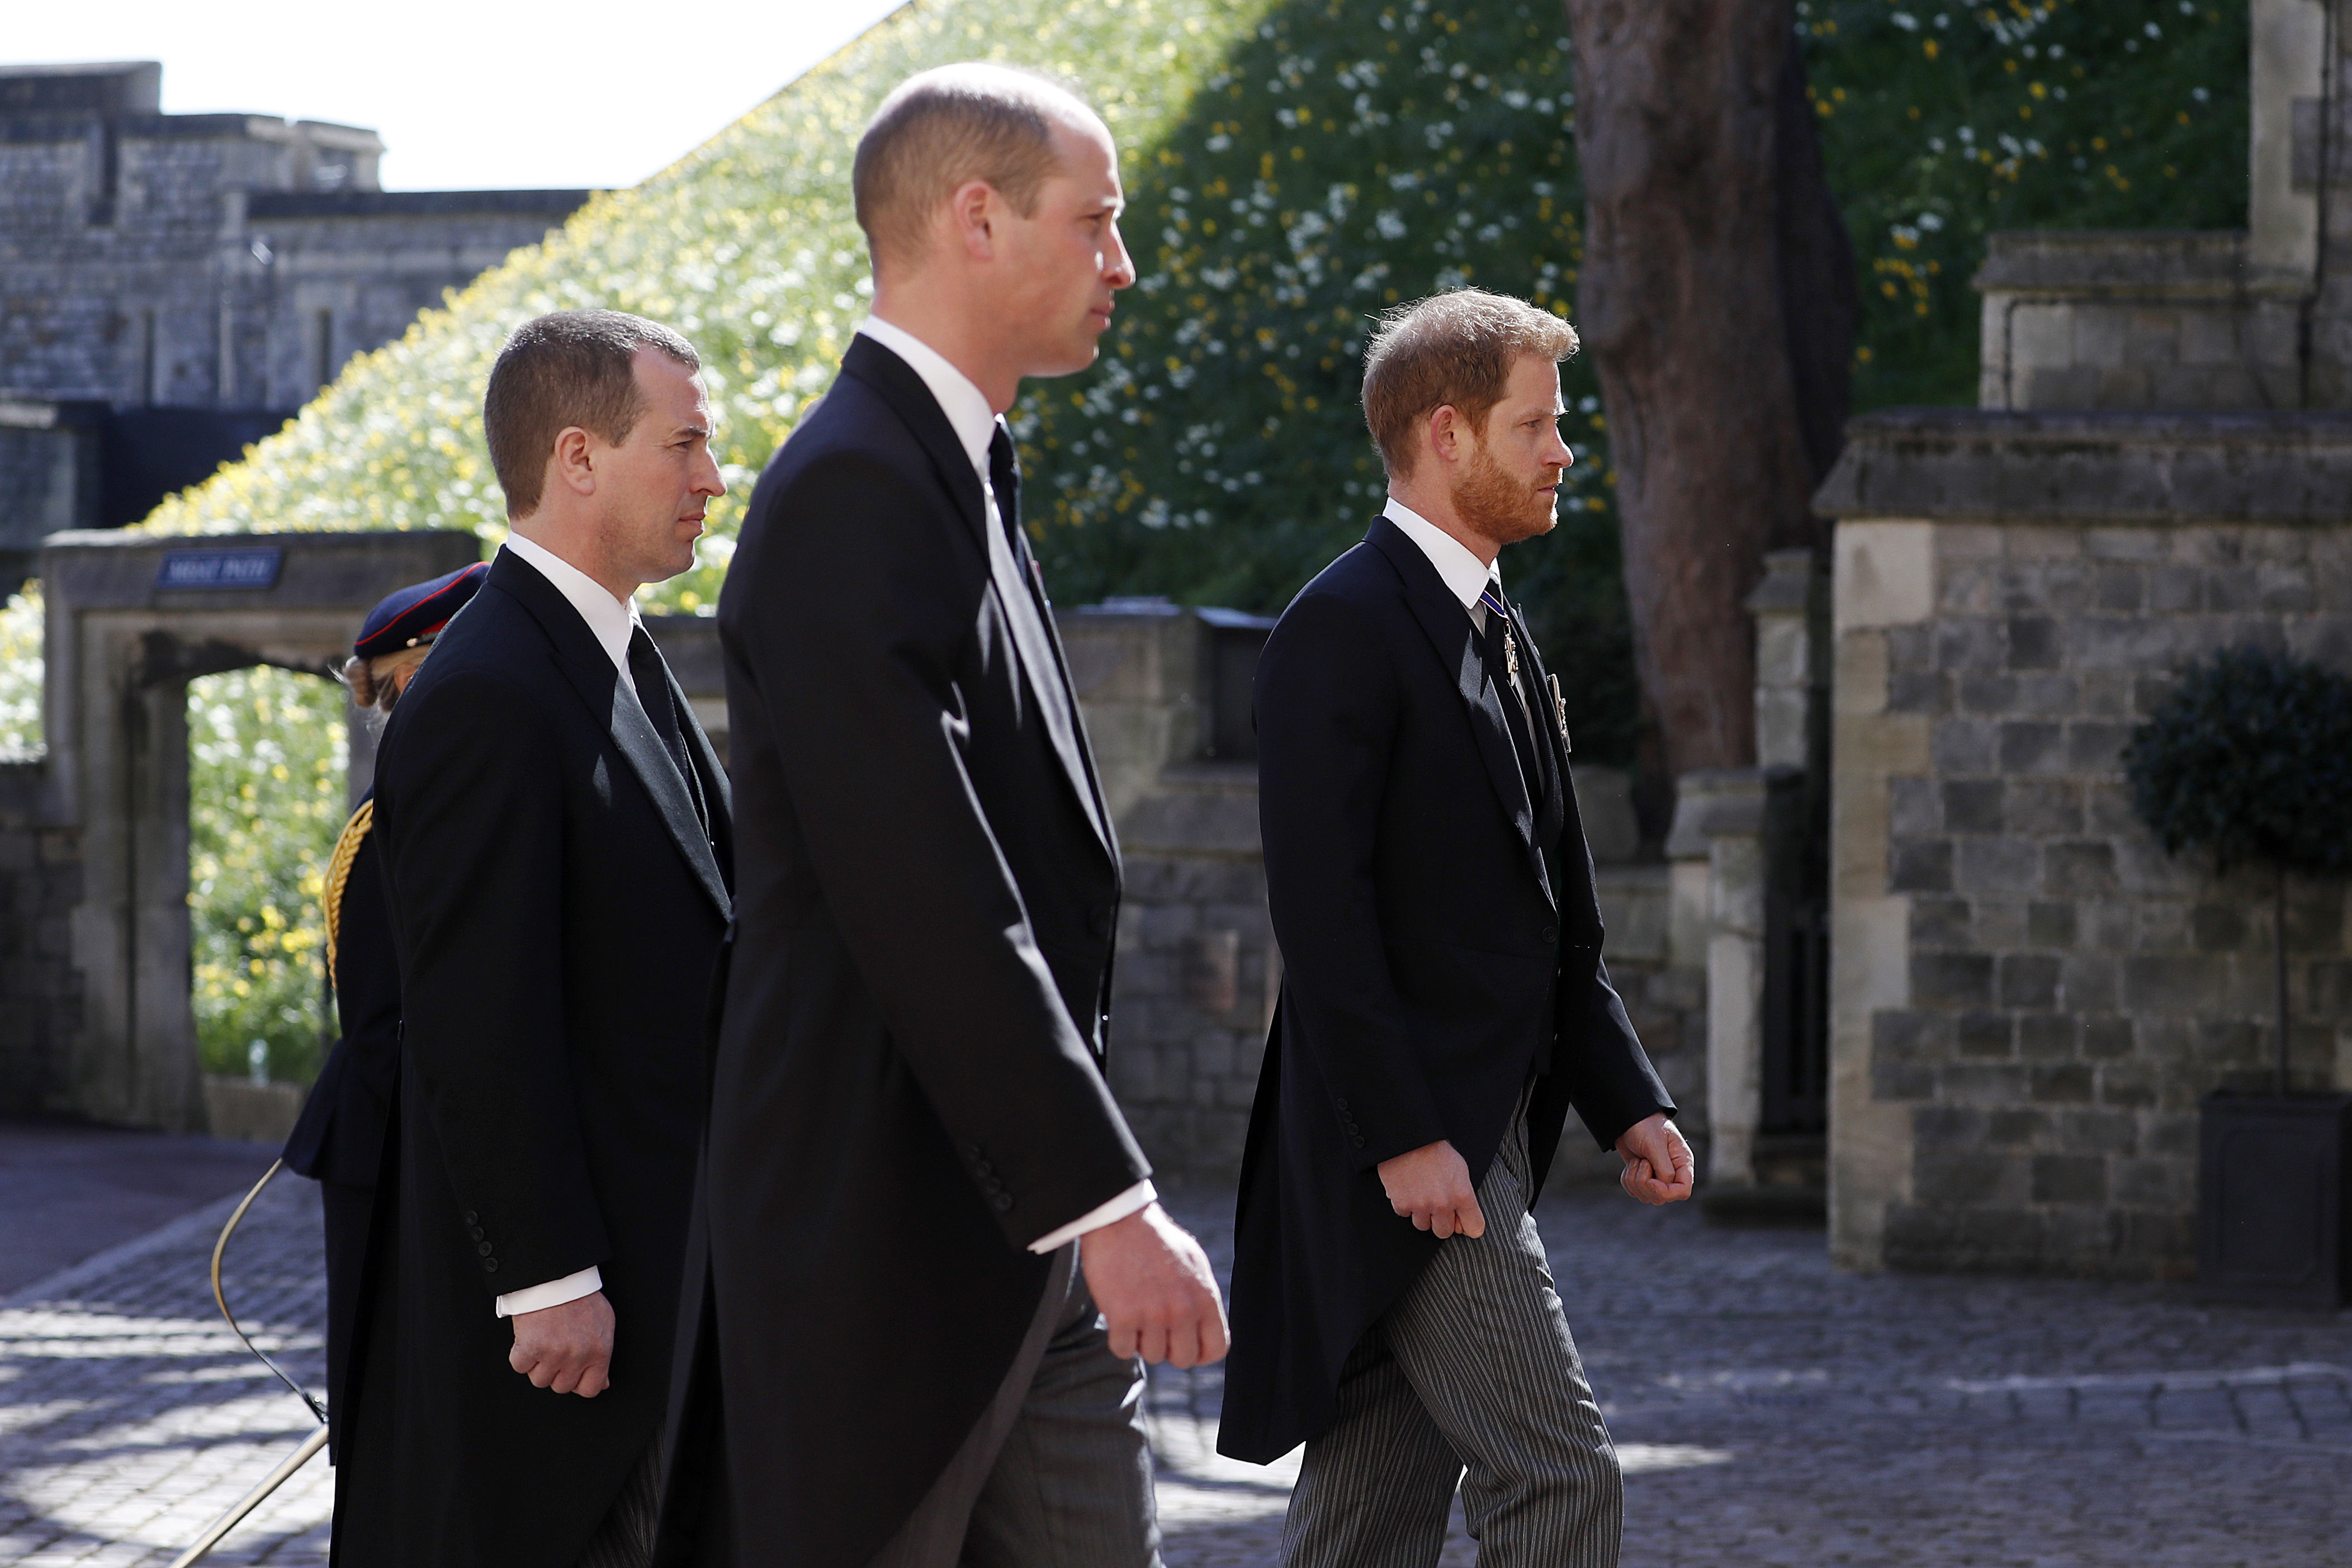 <p>Prince Philip's grandsons Peter Phillips, <a href="https://www.wonderwall.com/celebrity/profiles/overview/prince-william-482.article">Prince William</a> and <a href="https://www.wonderwall.com/celebrity/profiles/overview/prince-harry-481.article">Prince Harry</a> walked behind his casket during his funeral at Windsor Castle on April 17, 2021.</p>